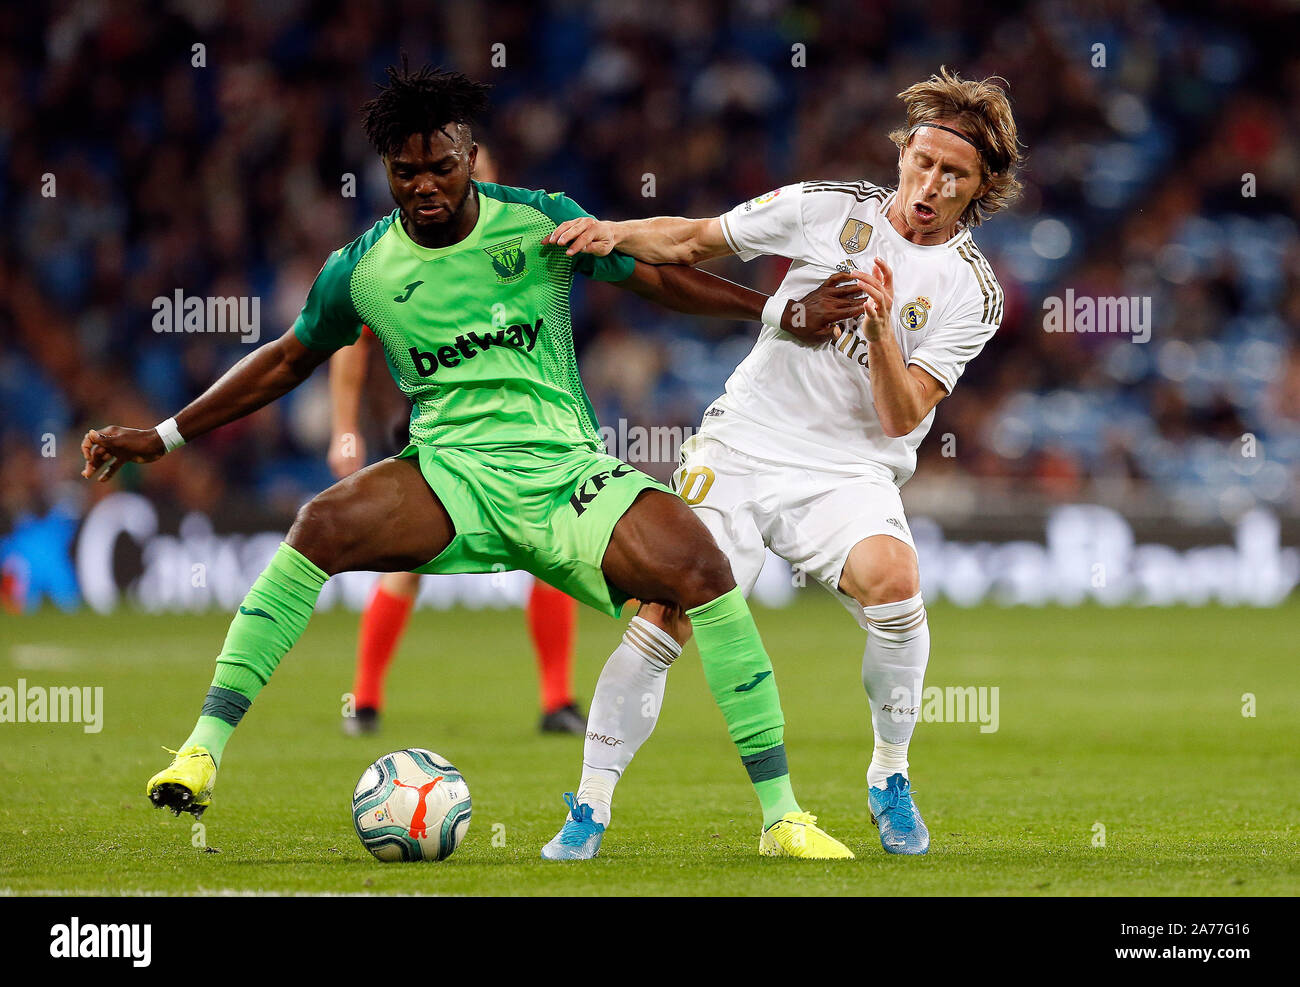 Madrid, Spain. 30th Oct, 2019. CD Leganes's Kenneth Omeruo and Real Madrid CF's Luka Modric competes for the ball during the Spanish La Liga match round 11 between Real Madrid and CD Leganes at Santiago Bernabeu Stadium.(Final score: Real Madrid 5 - 0 Leganes) Credit: SOPA Images Limited/Alamy Live News Stock Photo